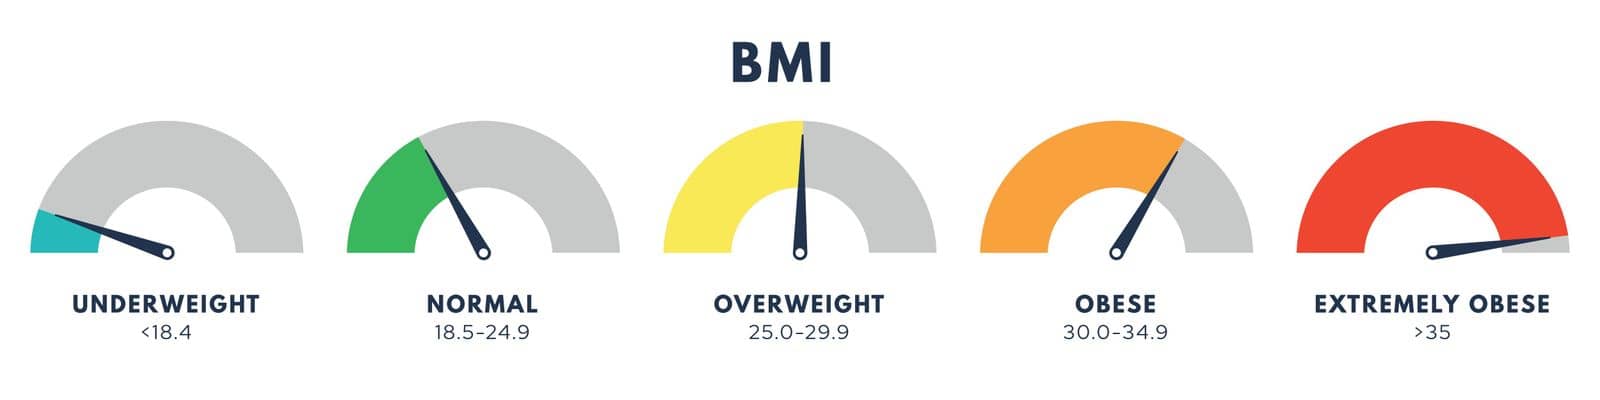 Body Mass Index or mass index scale. Types of BMI.Weight loss concept. Vector isolated illustration by vikalost